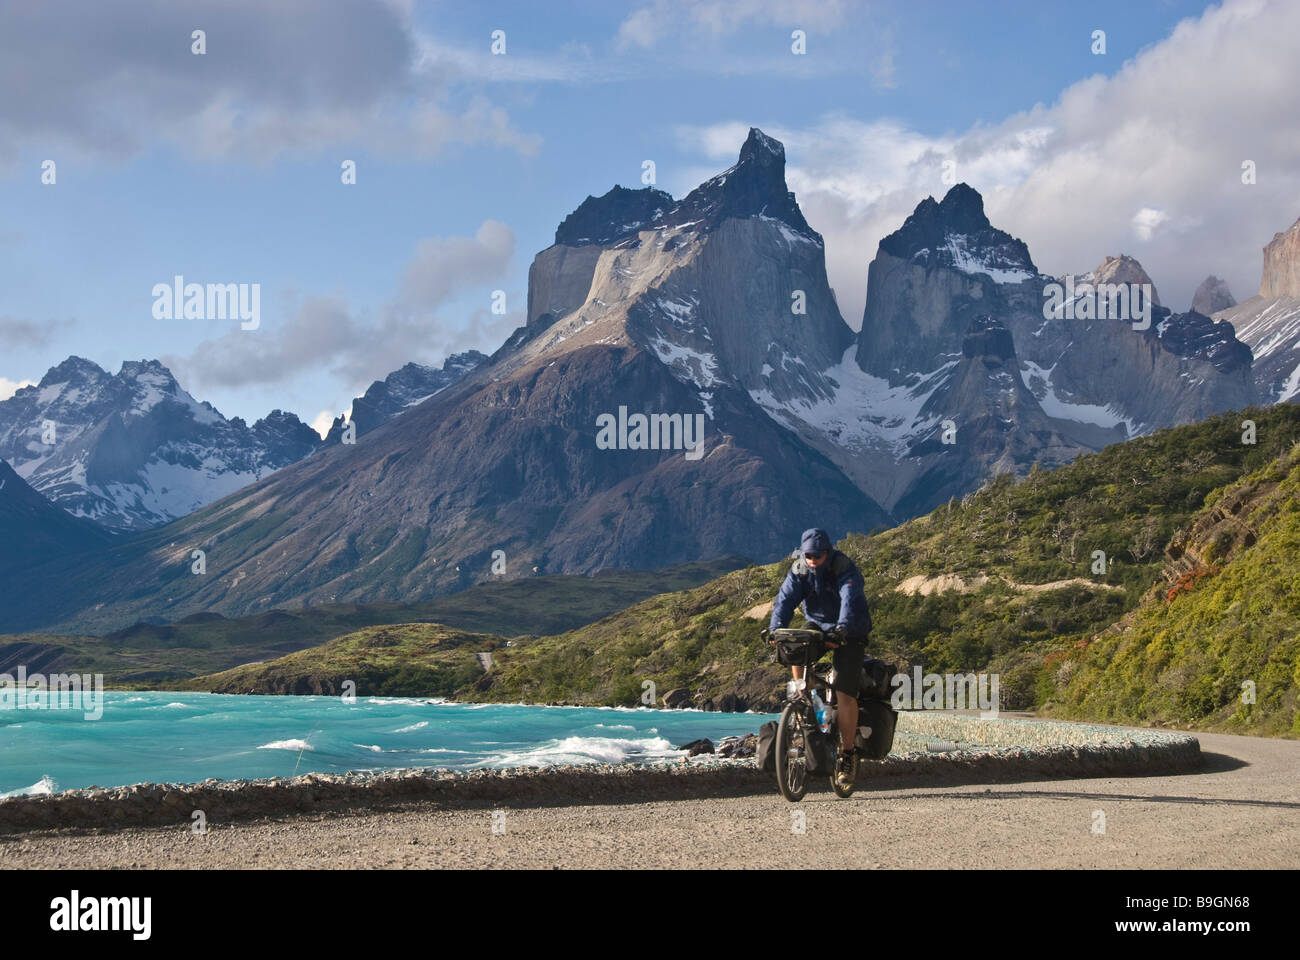 Elk198 4444 Chile Patagonia Torres del Paine NP Lago Pehoe Cuernos massif cyclist Stock Photo